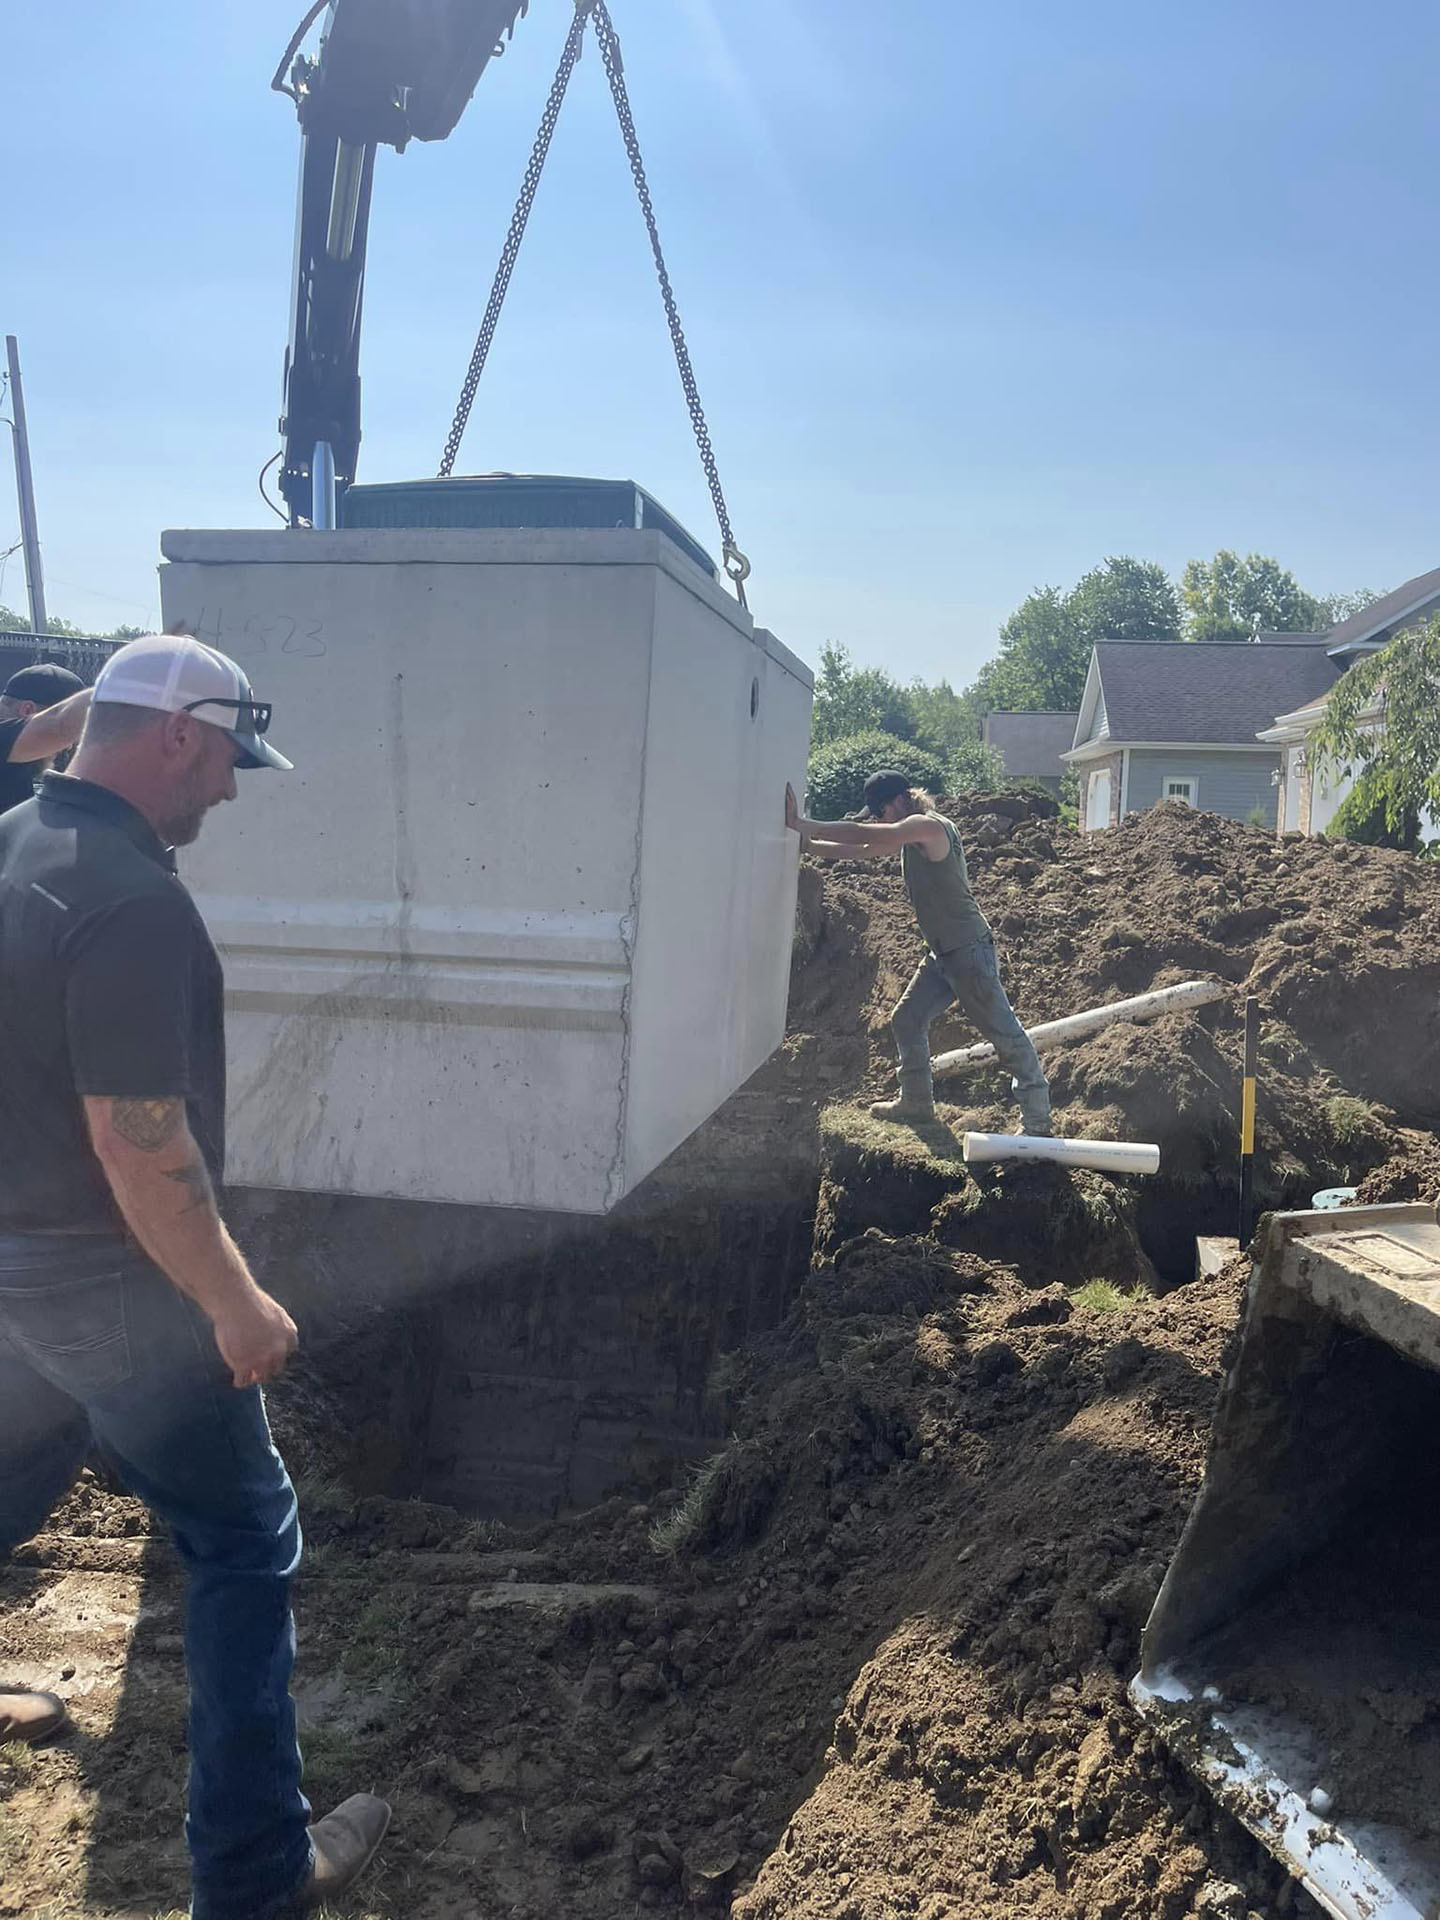 The Mansfield Sanitation team. Our professional and knowledgable staff can diagnose and solve all your septic and drain problems.